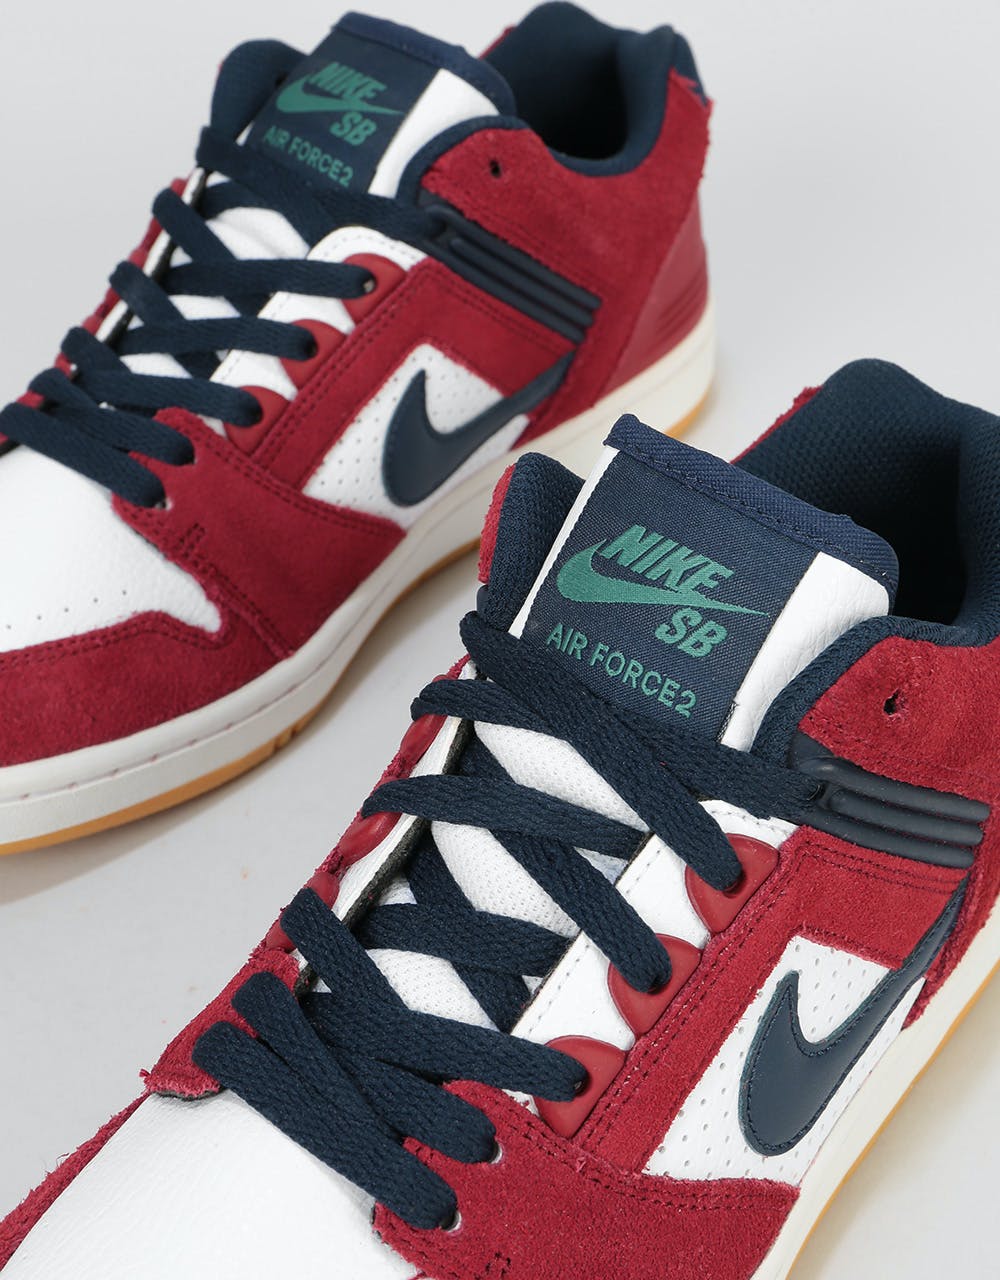 Nike SB Air Force II Low Skate Shoes - Team Red/Obsidian-White-White